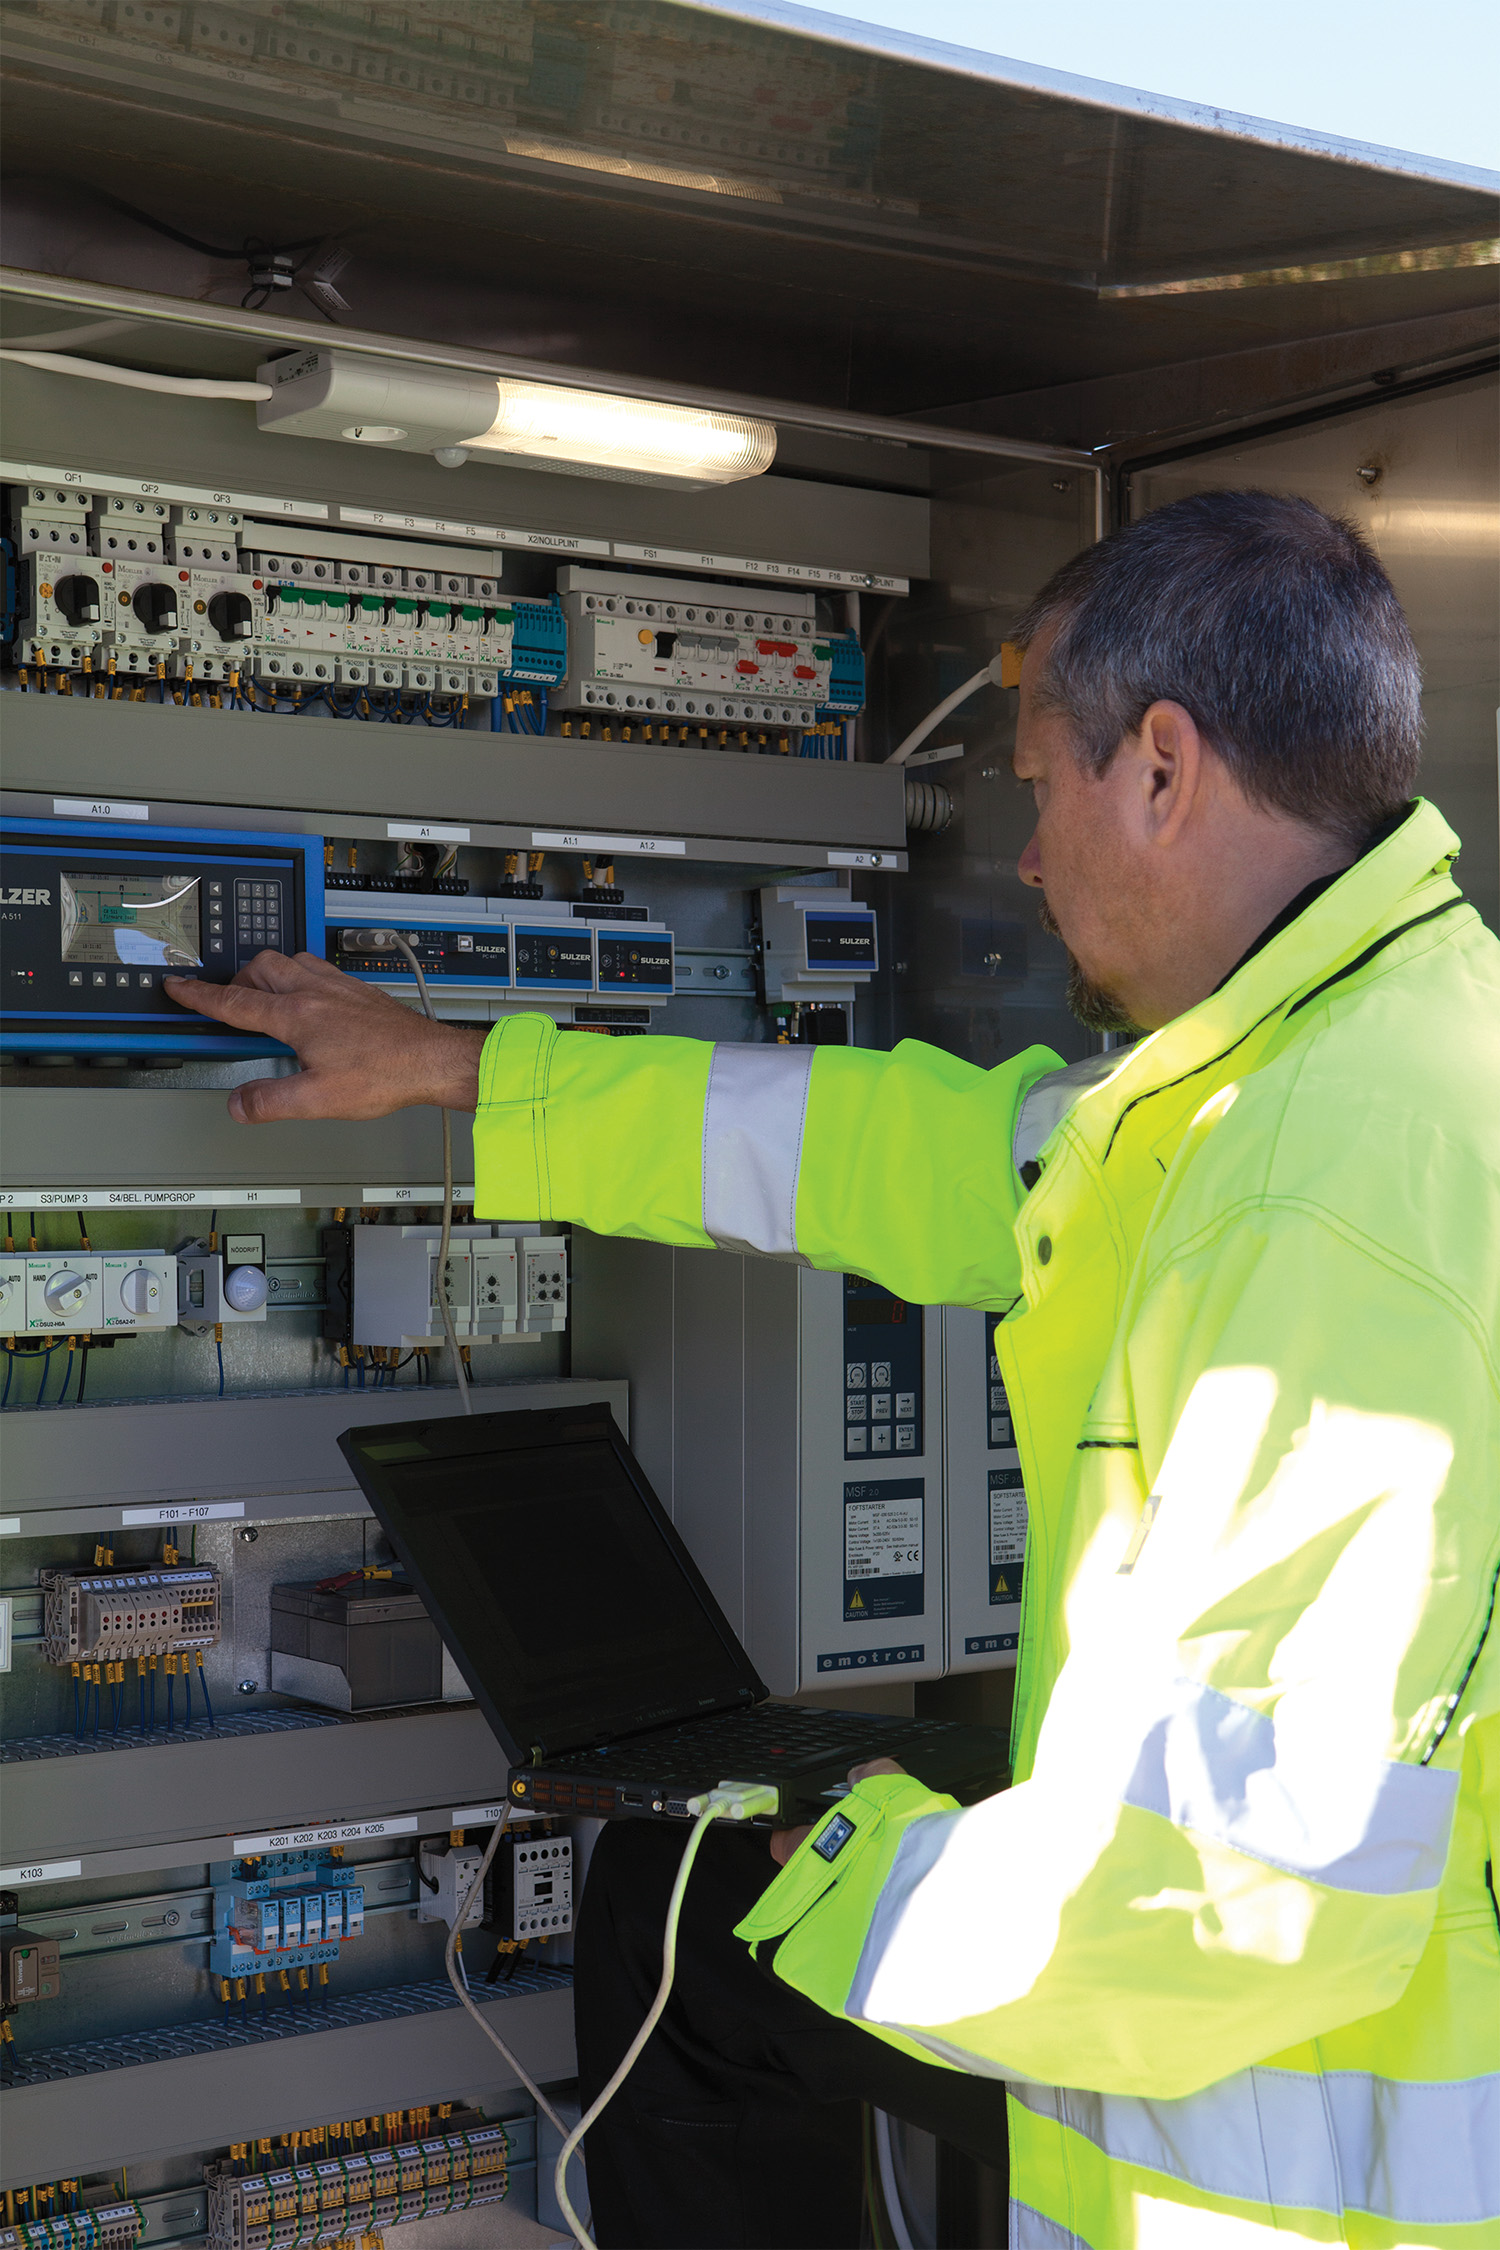 Smart pumping controllers can deliver significant improvements in performance